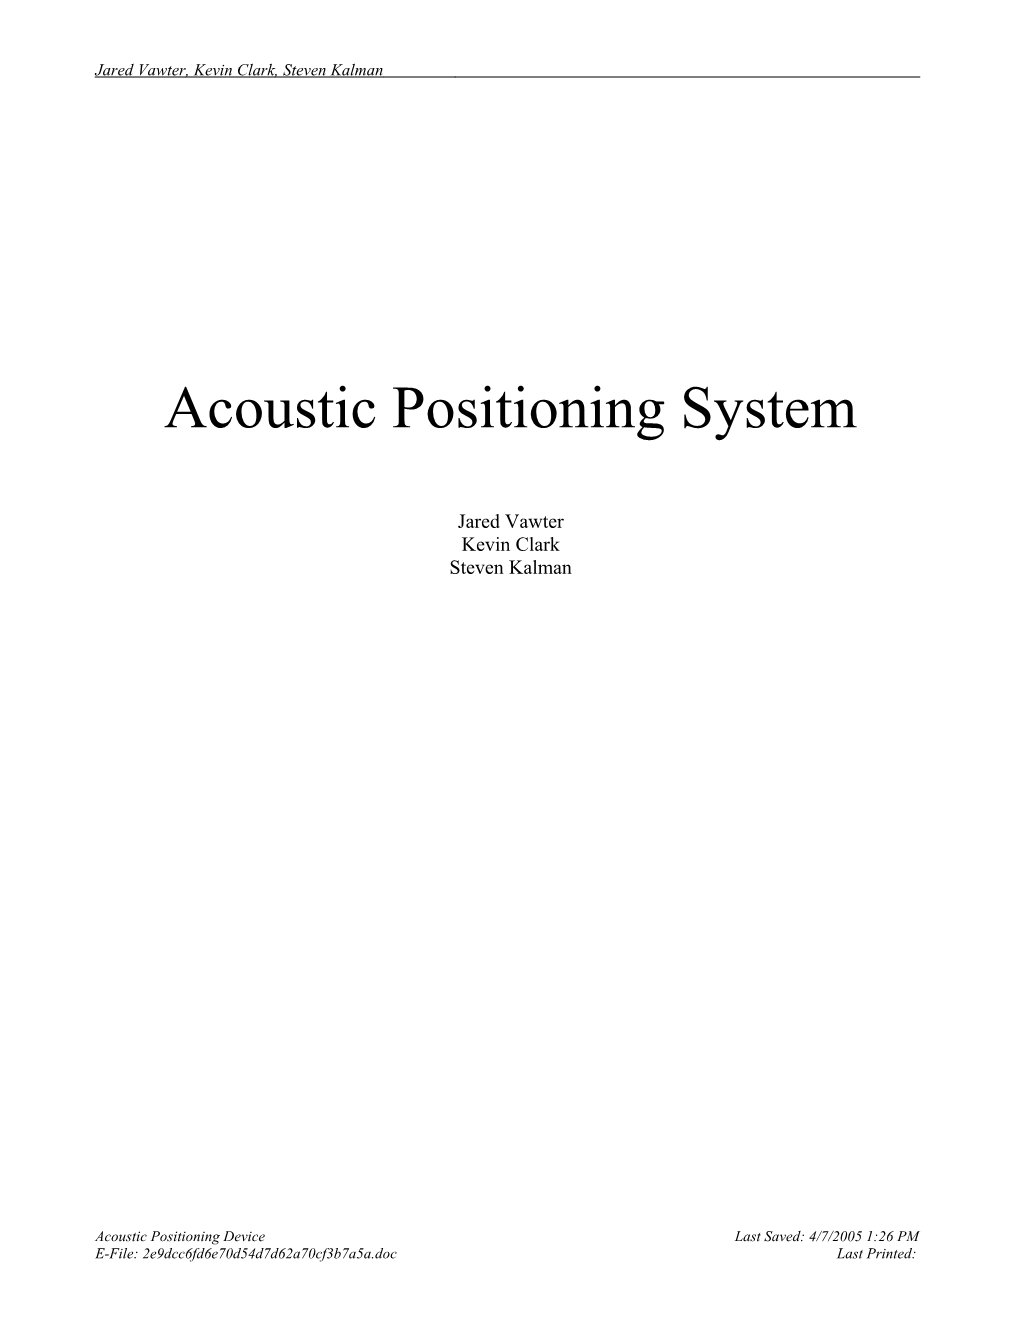 Acoustic Positioning System